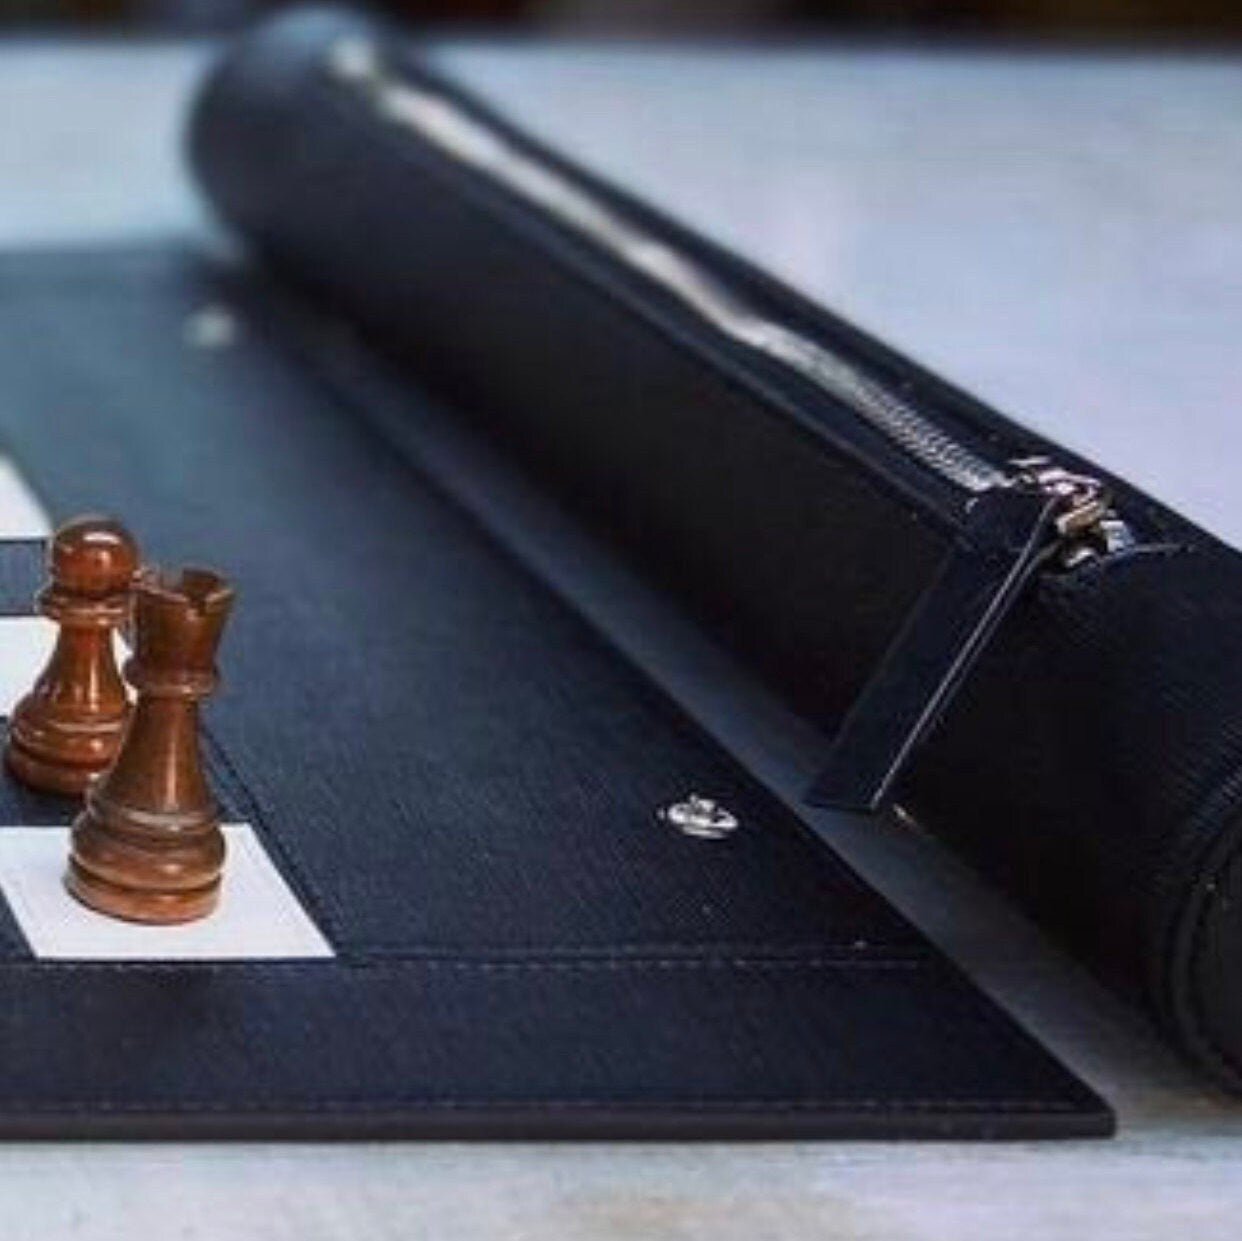 Handmade Leather Luxury Handmade Roll Up Chess Board/ High Quality Portable Leather Travel Chess Set / Wooden Chess Pieces Father's Day Gift - Turkish TV Series